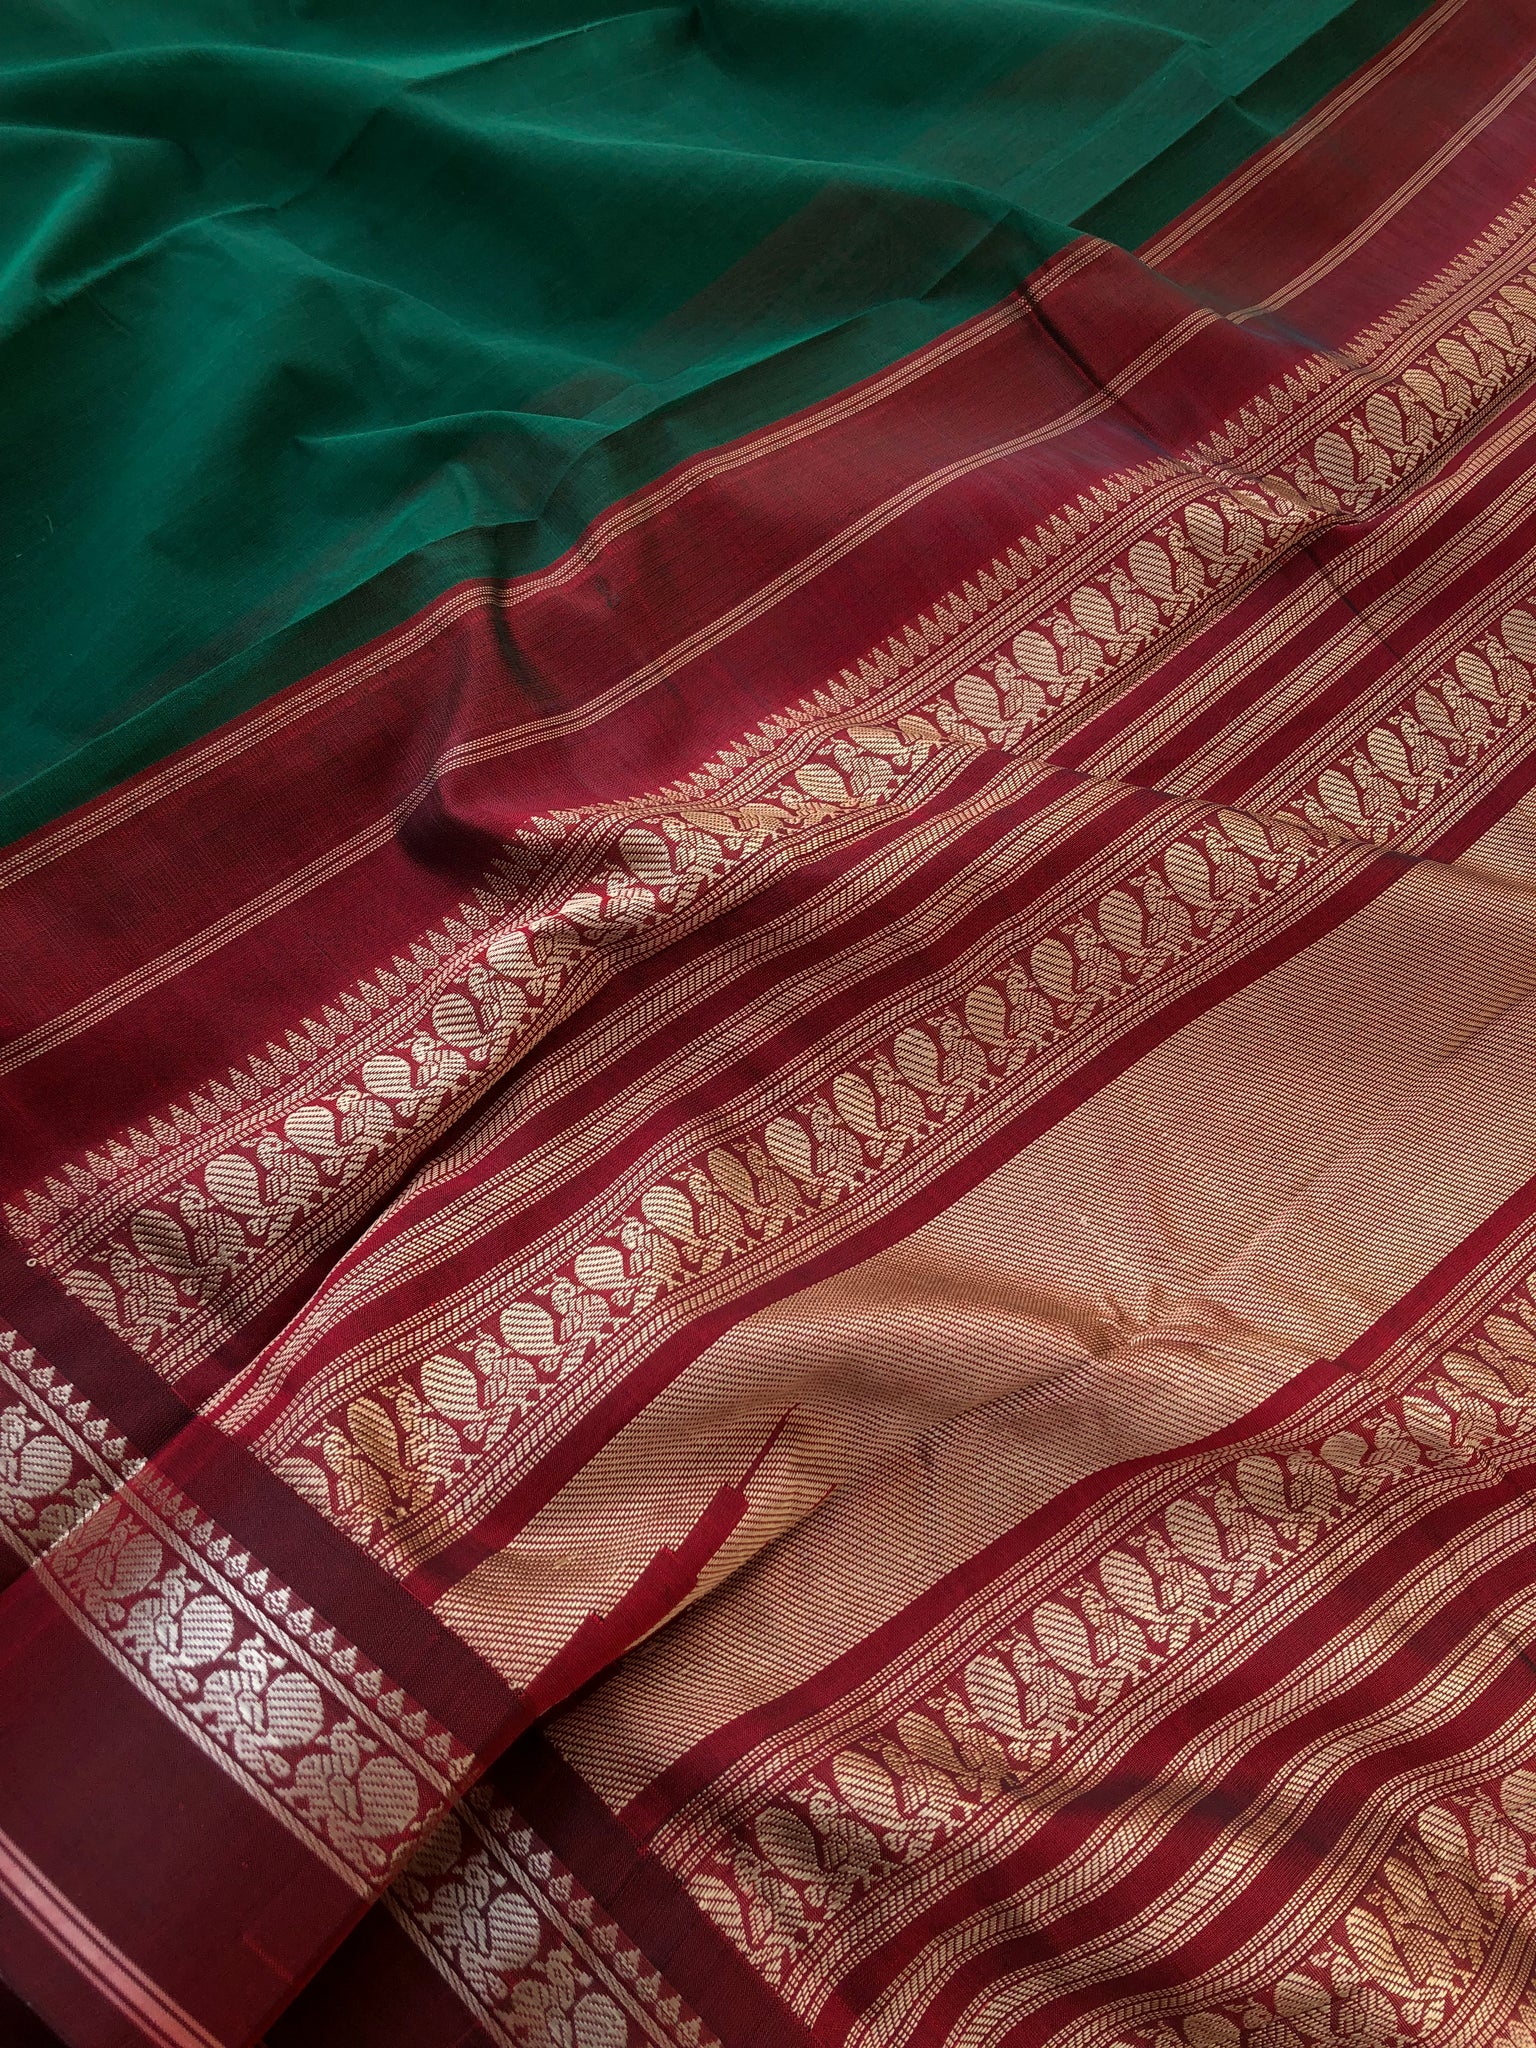 Cotton body with Pure Silk Borders - deepest Meenakshi green and maroon